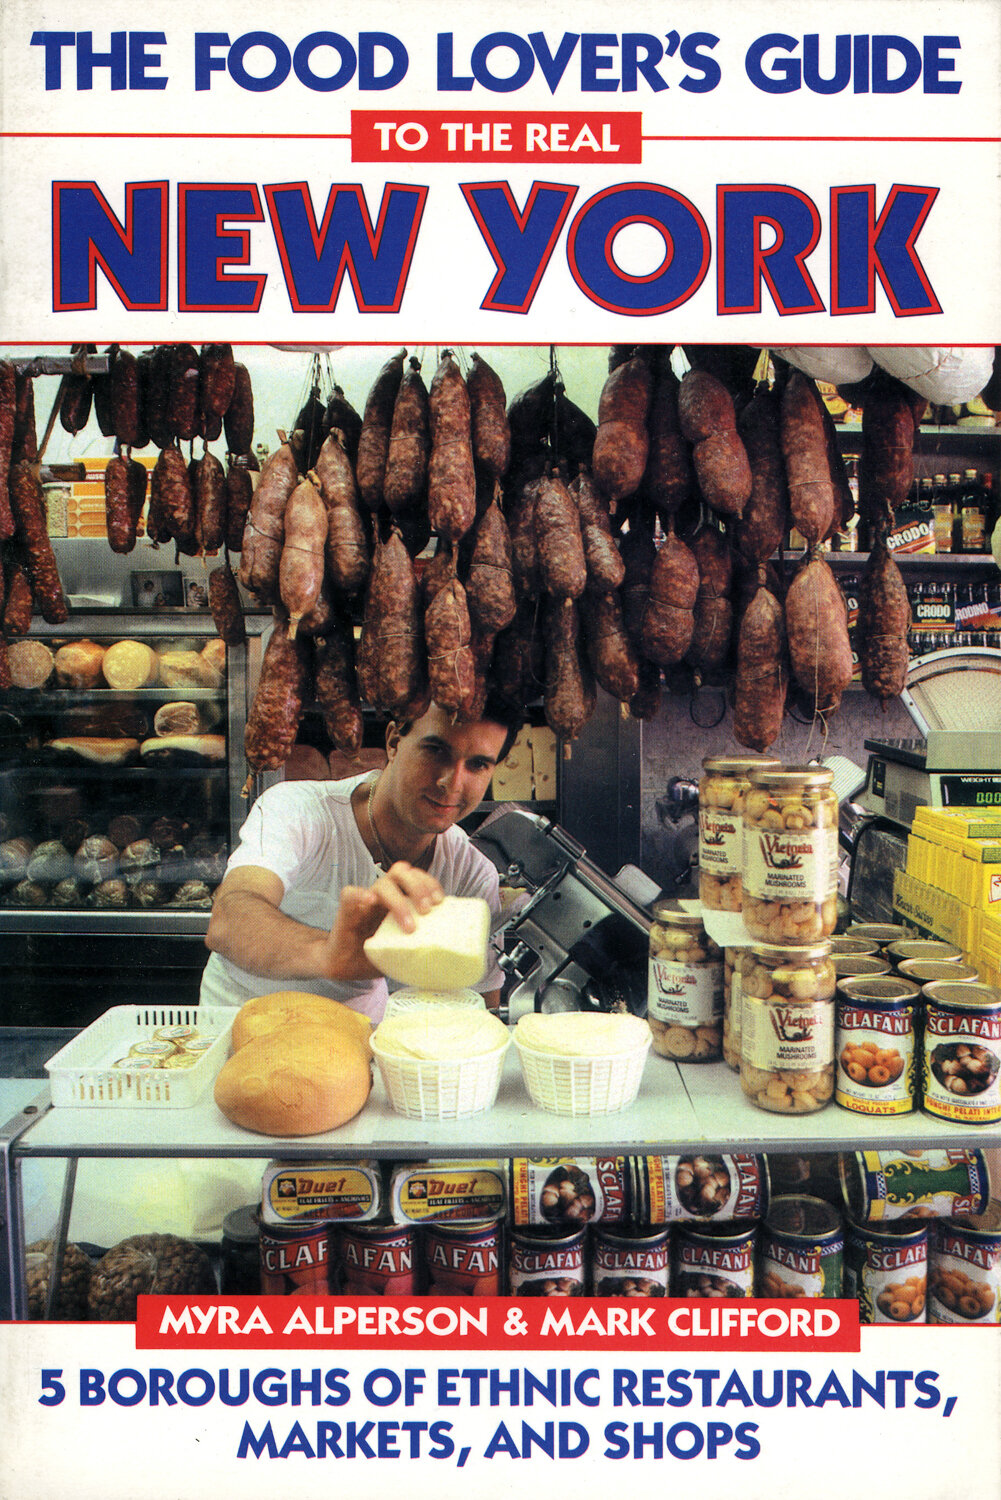  The Food Lover’s Guide to the Real New York  